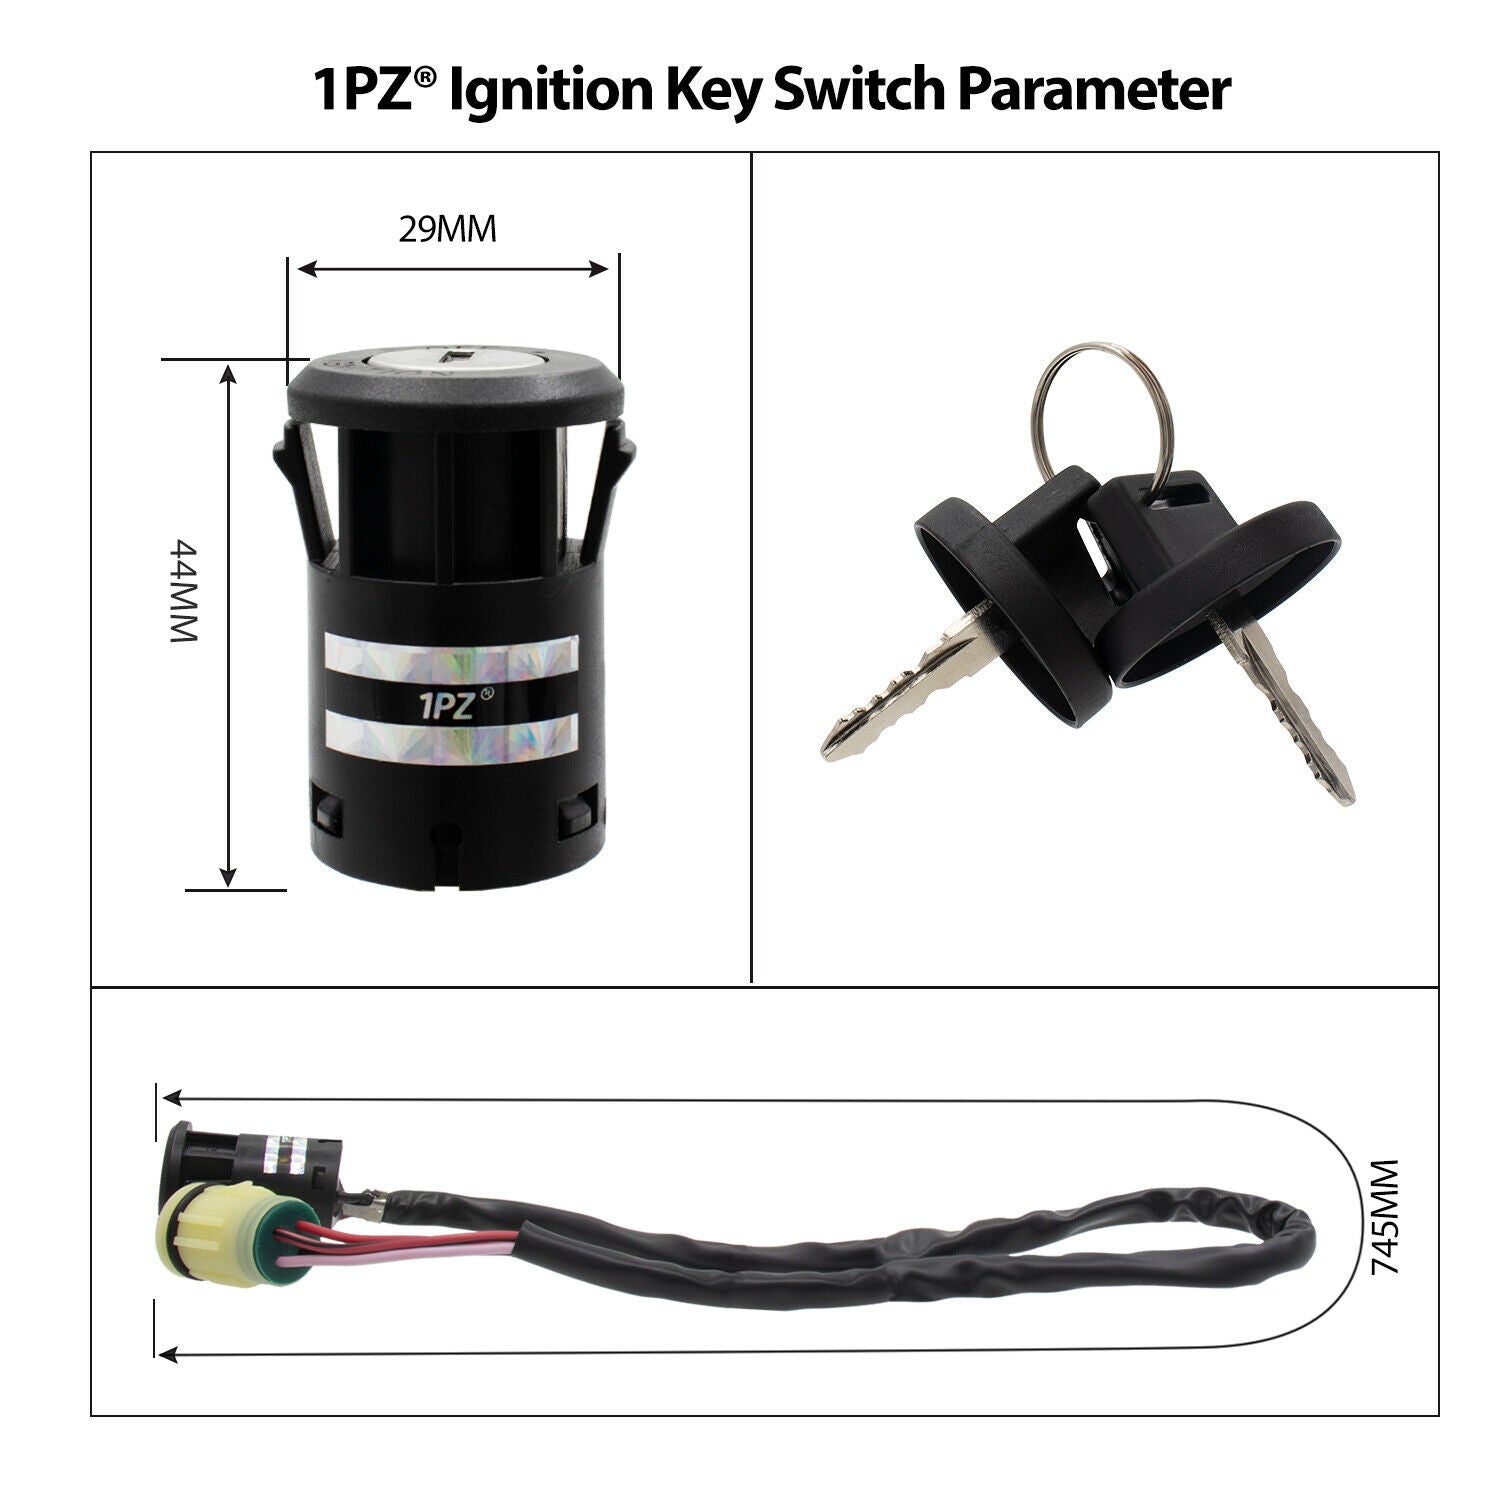 1PZ Ignition Key Switch Replacement for Honda Rancher 350 TRX-350 2000-2006